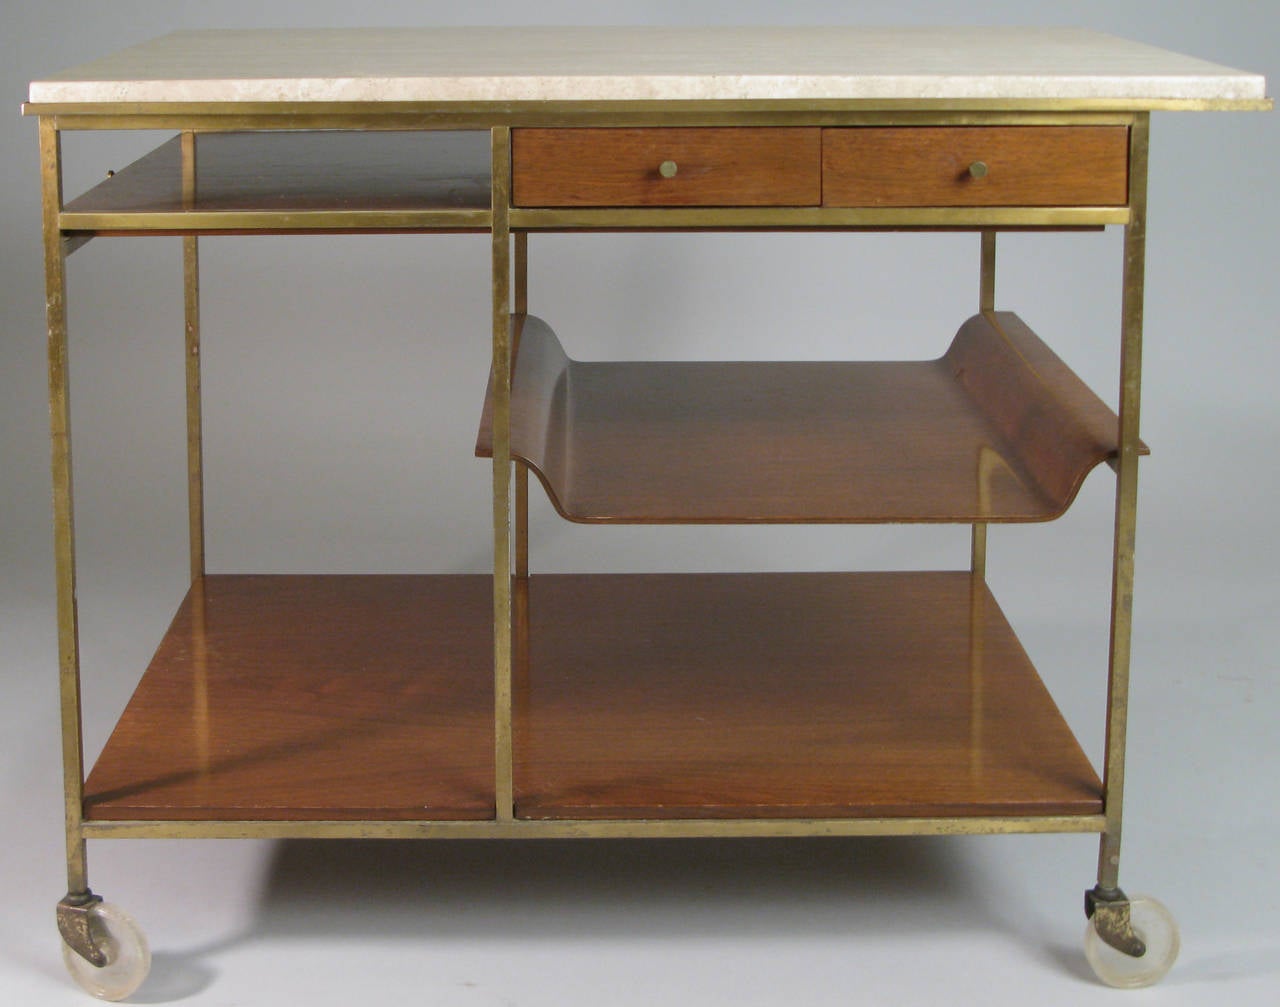 a classic 1950's rolling bar cart by Paul McCobb for Calvin with a sliding shelf, travertine top, two drawers and a removable serving tray which doubles as a shelf.